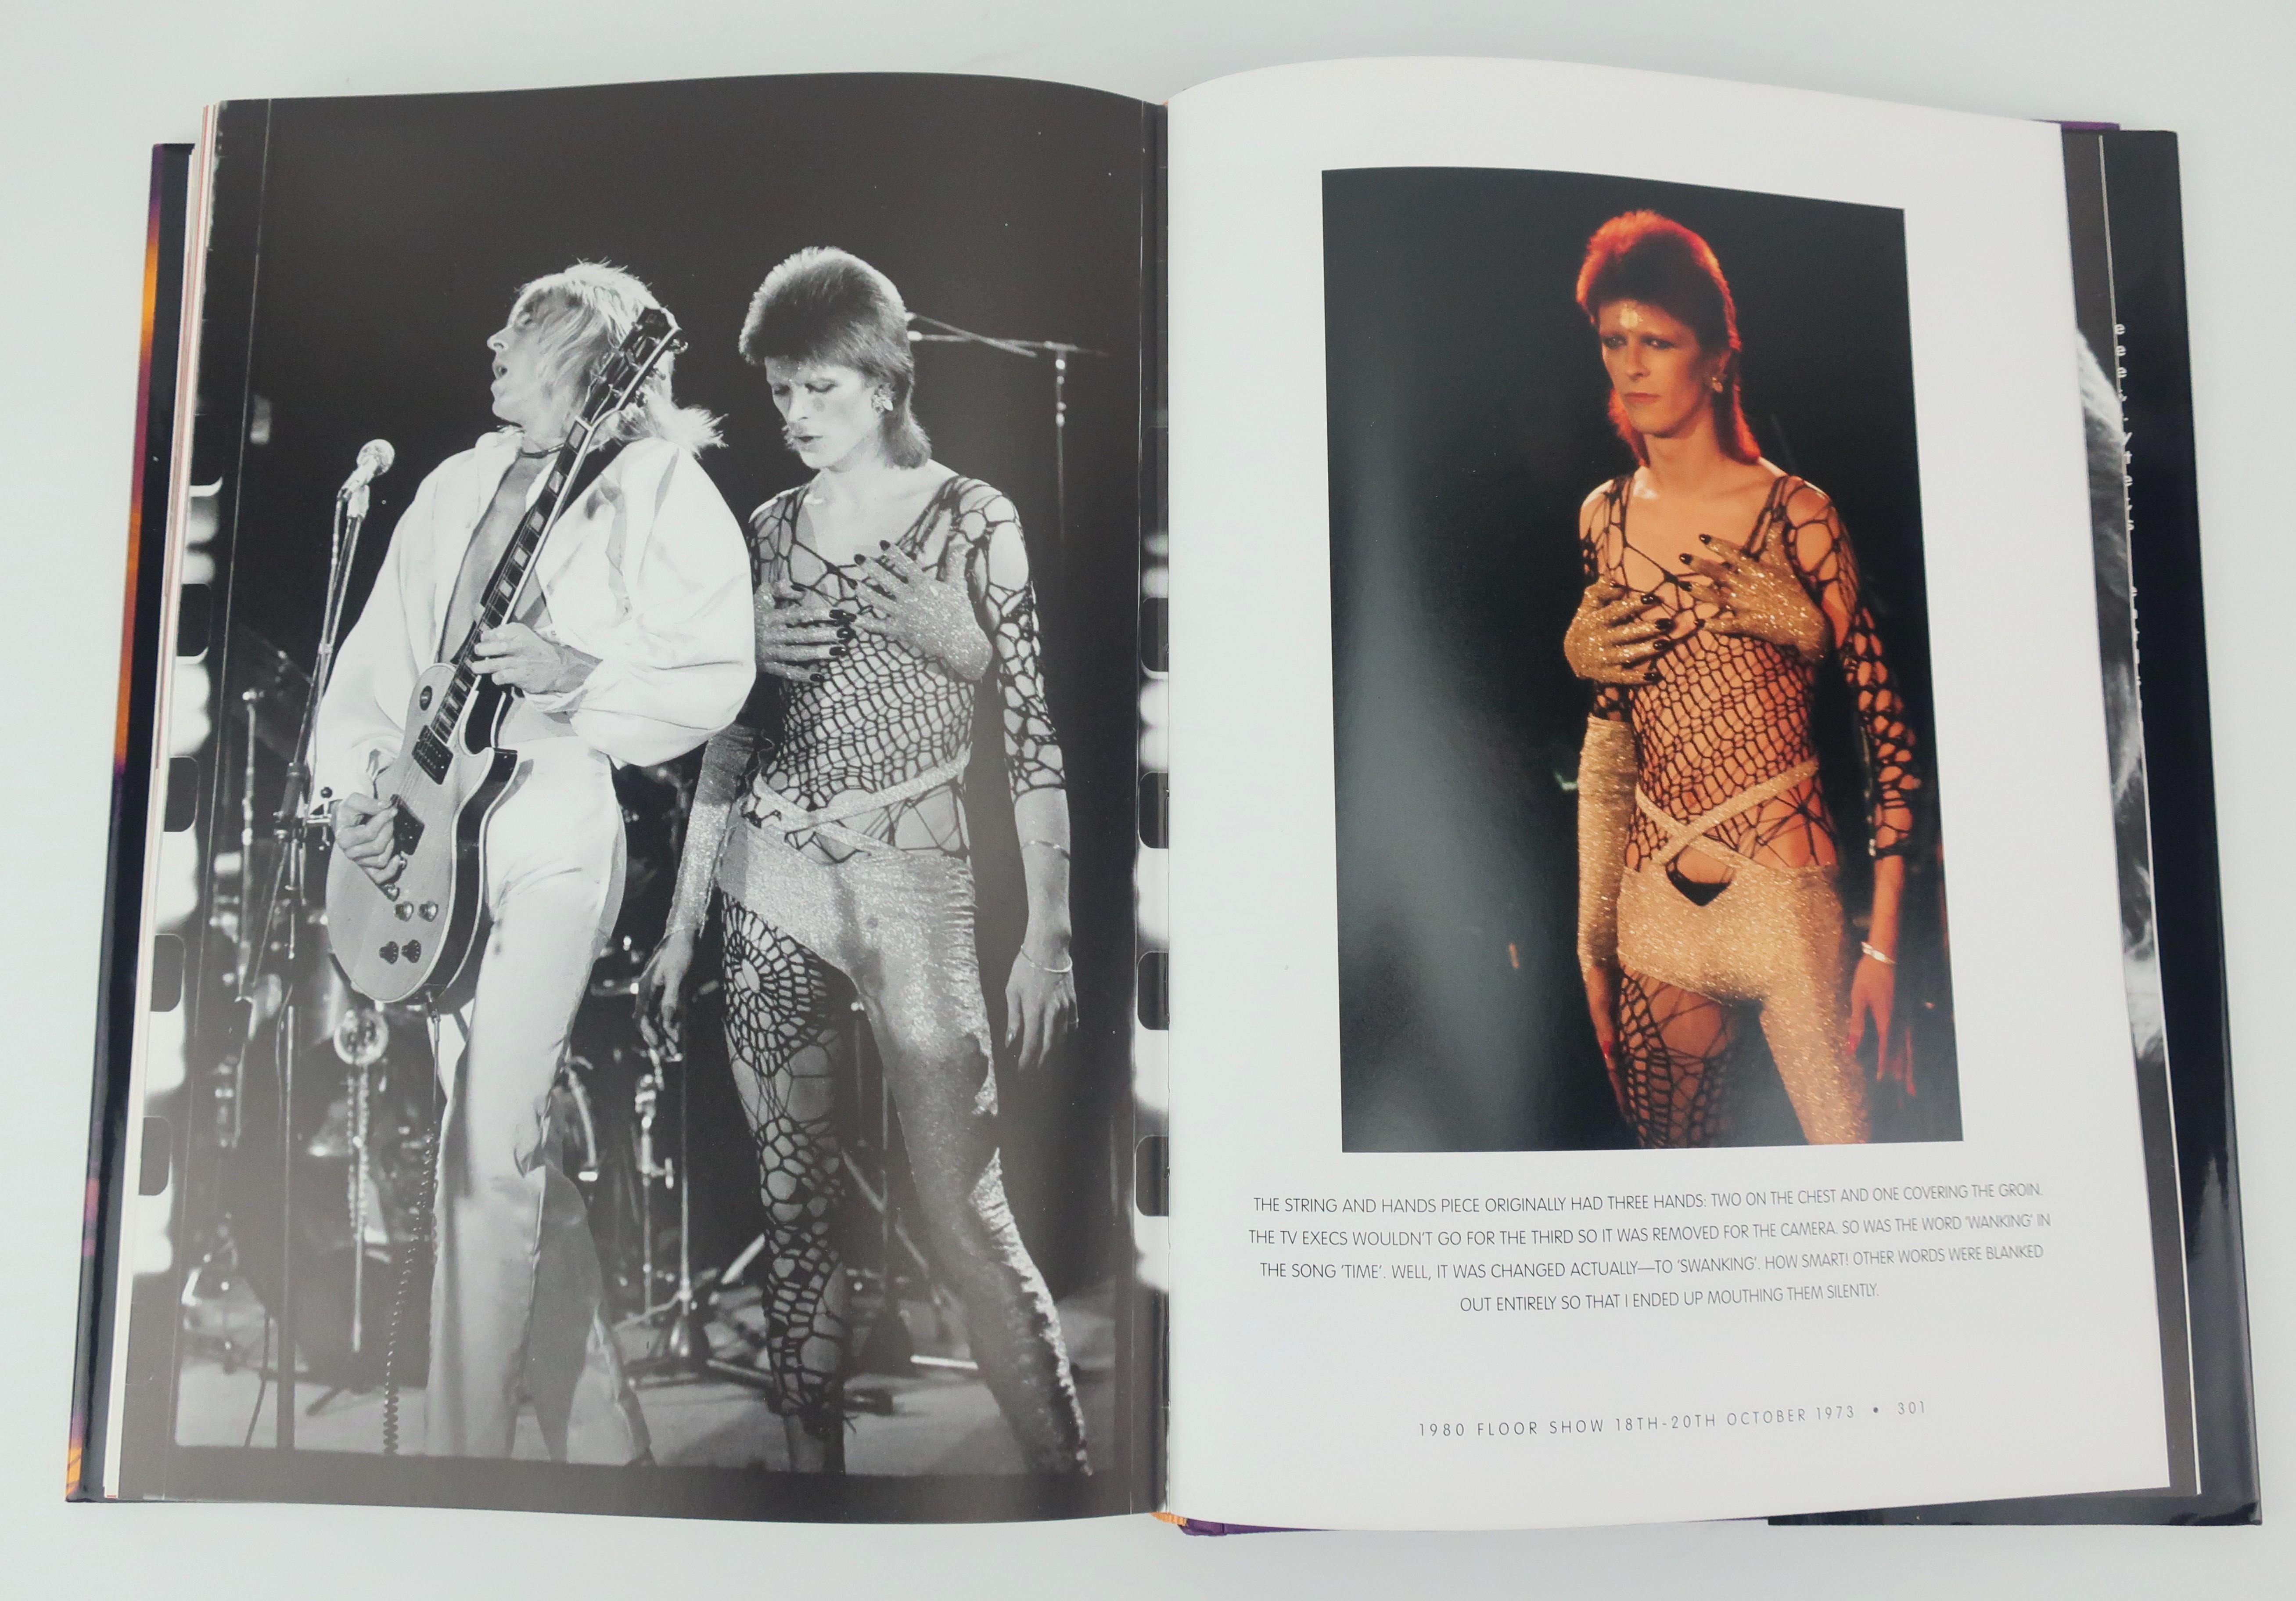 David Bowie’s Moonage Daydream Coffee Table Book of Ziggy Stardust Fashion, 2005 1